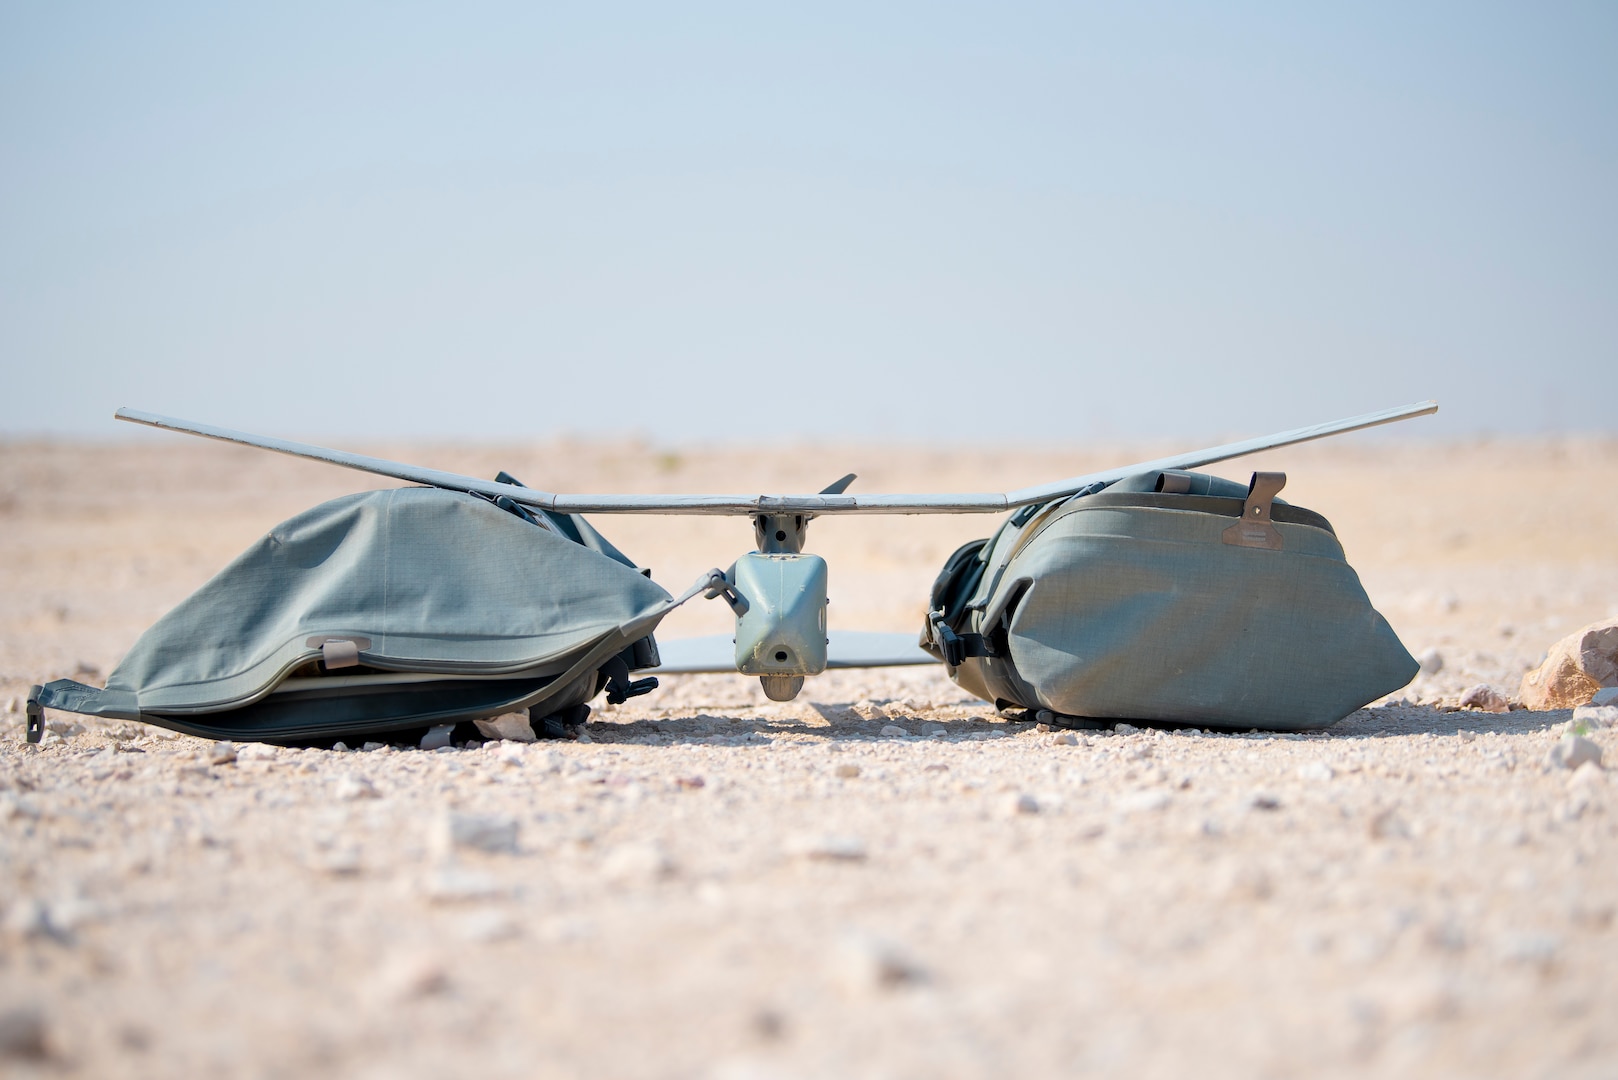 A Raven B Small Unmanned Aircraft System is preparing for flight training at Al Udeid Air Base, Qatar, July 9, 2020. The Raven B is a drone with full-spectrum capability that can be hand-launched from nearly anywhere on the installation at any time. Its primary mission at AUAB is force protection, however, the drone has been flown for real-world missions to include conducting airfield assessments and post-storm damage analysis. (U.S. Air Force photo by Senior Airman Ashley Perdue)